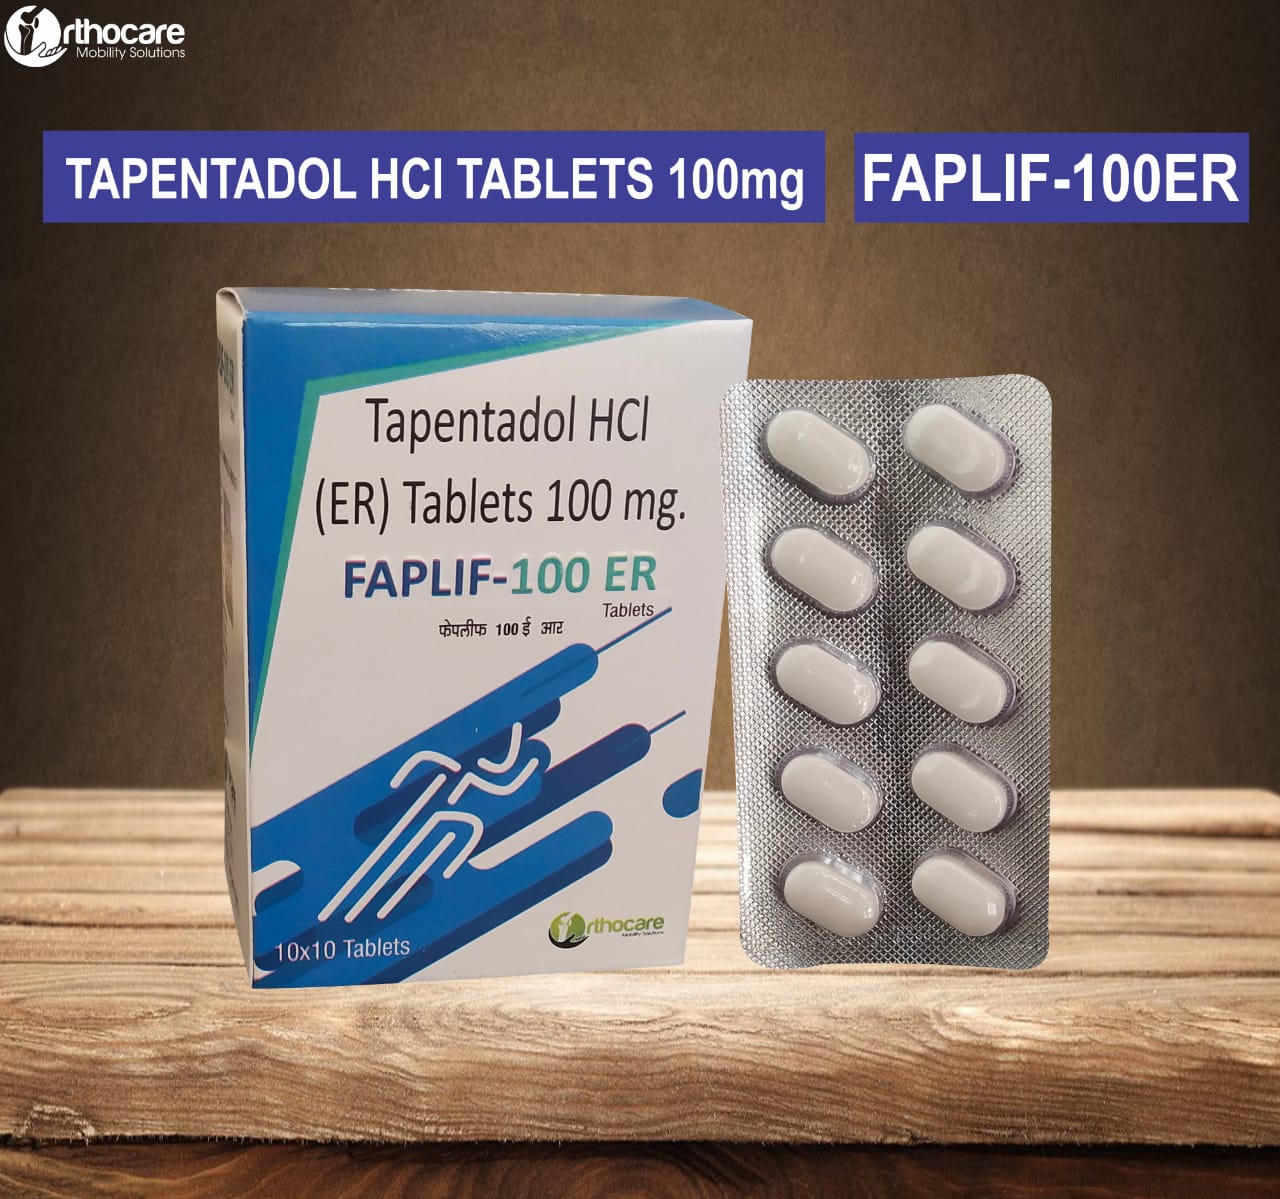 Faplif 100 ER Tablet Suppliers, Exporter in Dadra And Nagar Haveli And Daman And Diu